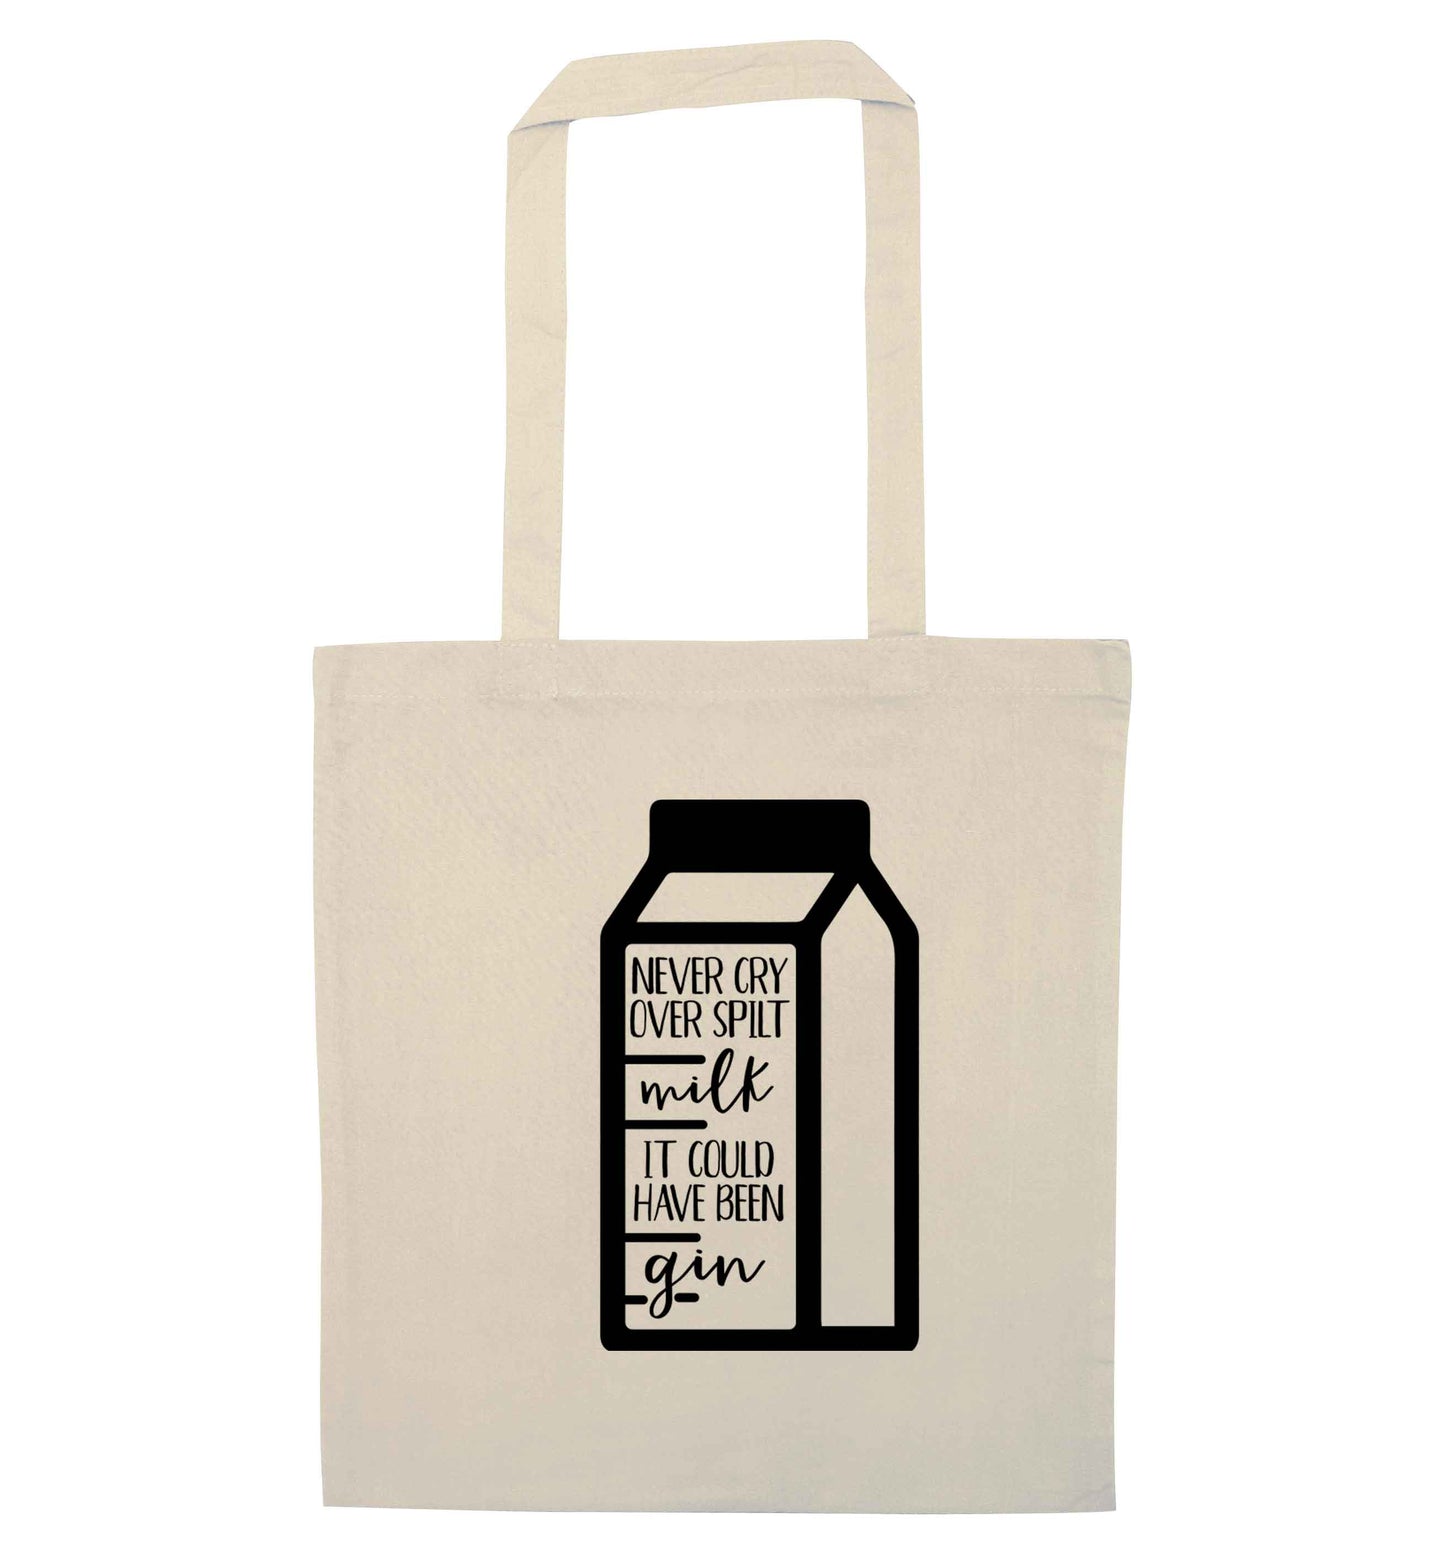 Never cry over spilt milk, it could have been gin natural tote bag